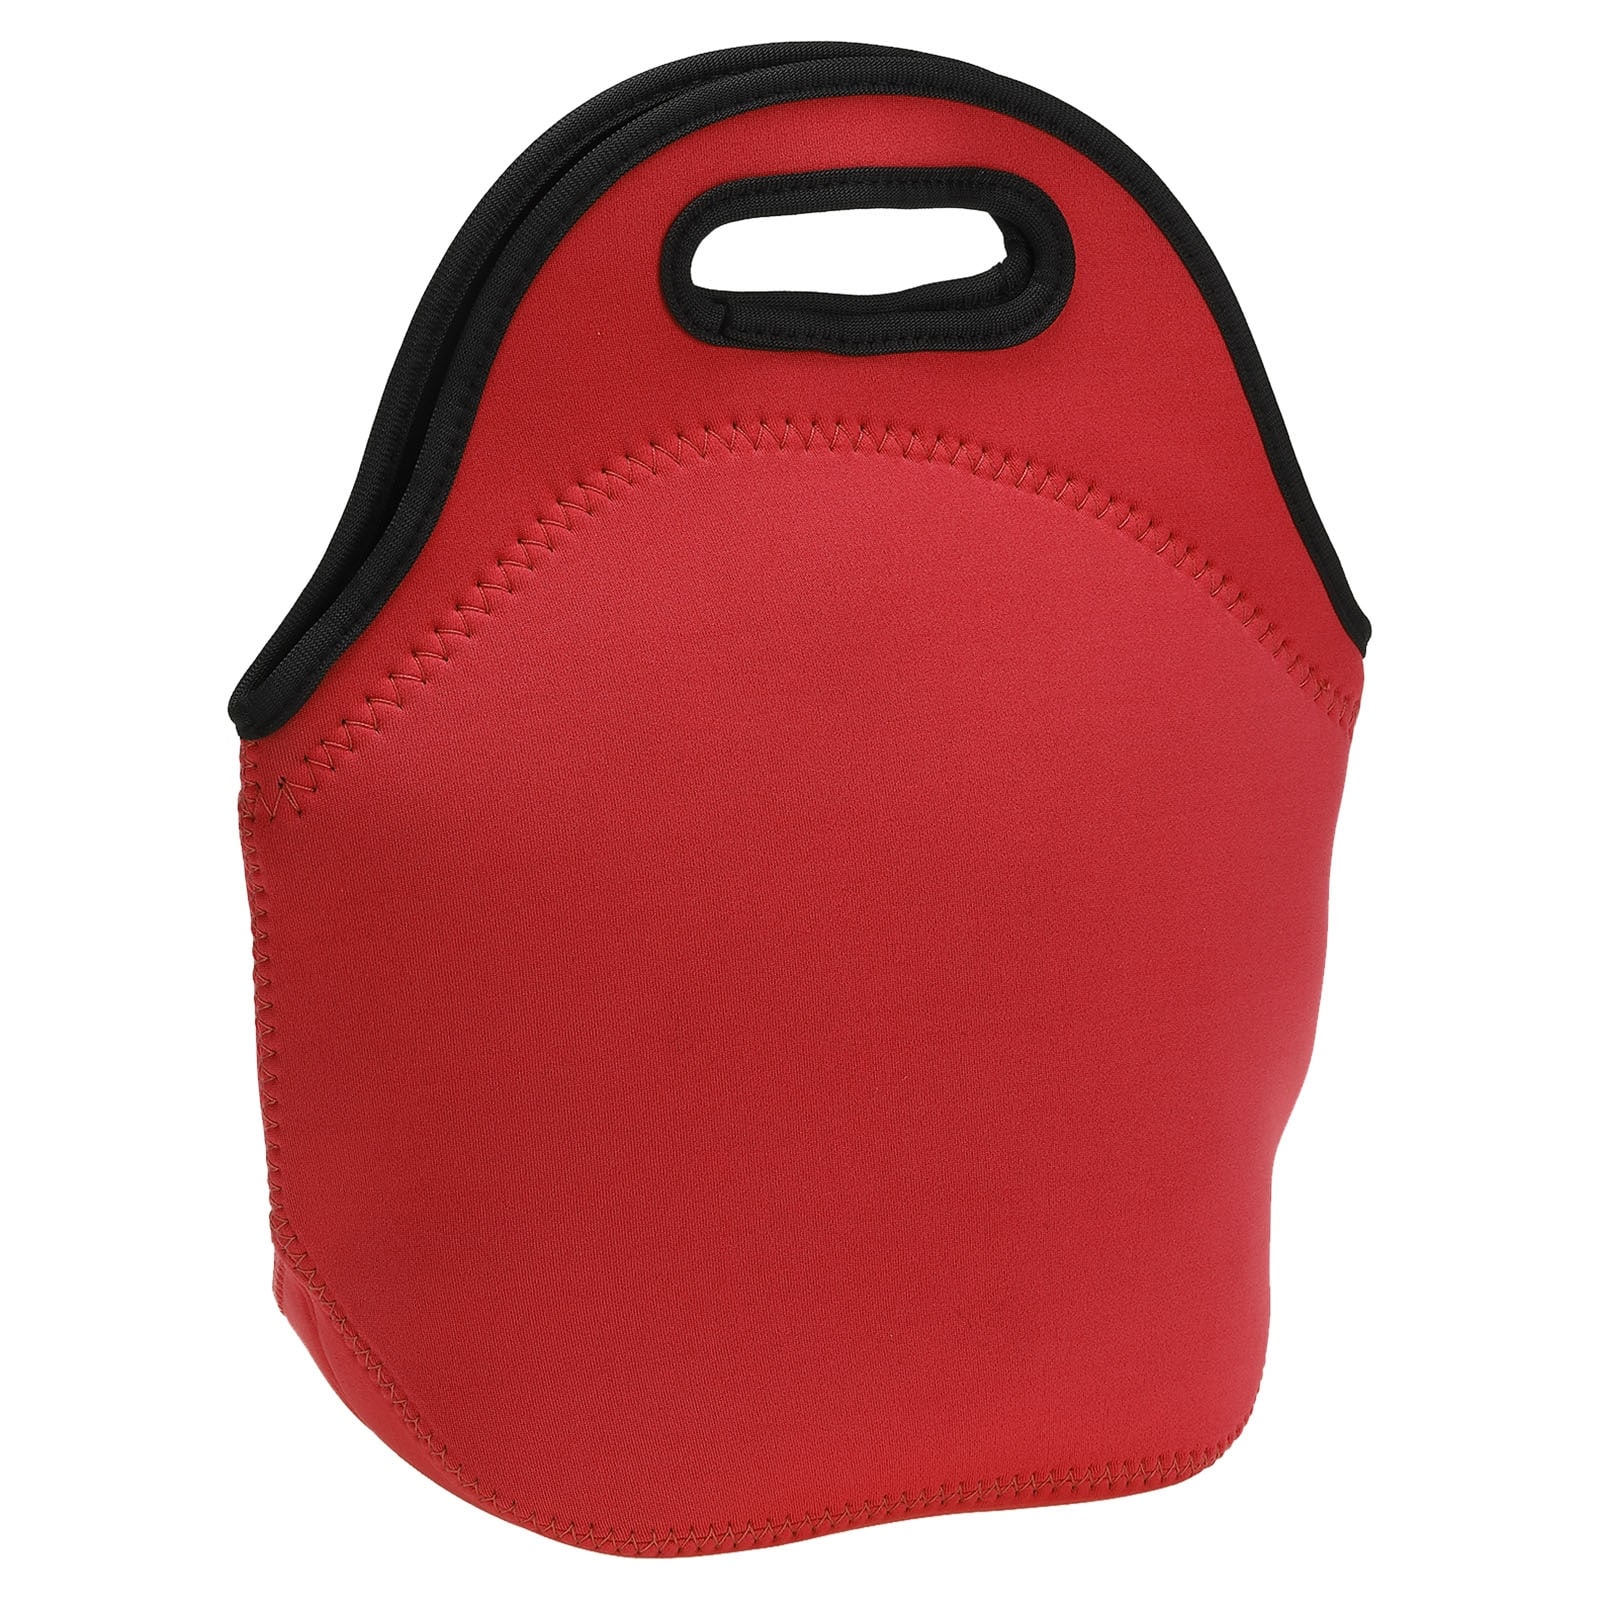 https://ak1.ostkcdn.com/images/products/is/images/direct/a8329c916e05ed2d48b95f6224404bab4e789b6b/Insulated-Lunch-Bags%2C-12%22x6%22x12%22-Thermal-Lunch-Portable-Containers-Bag.jpg